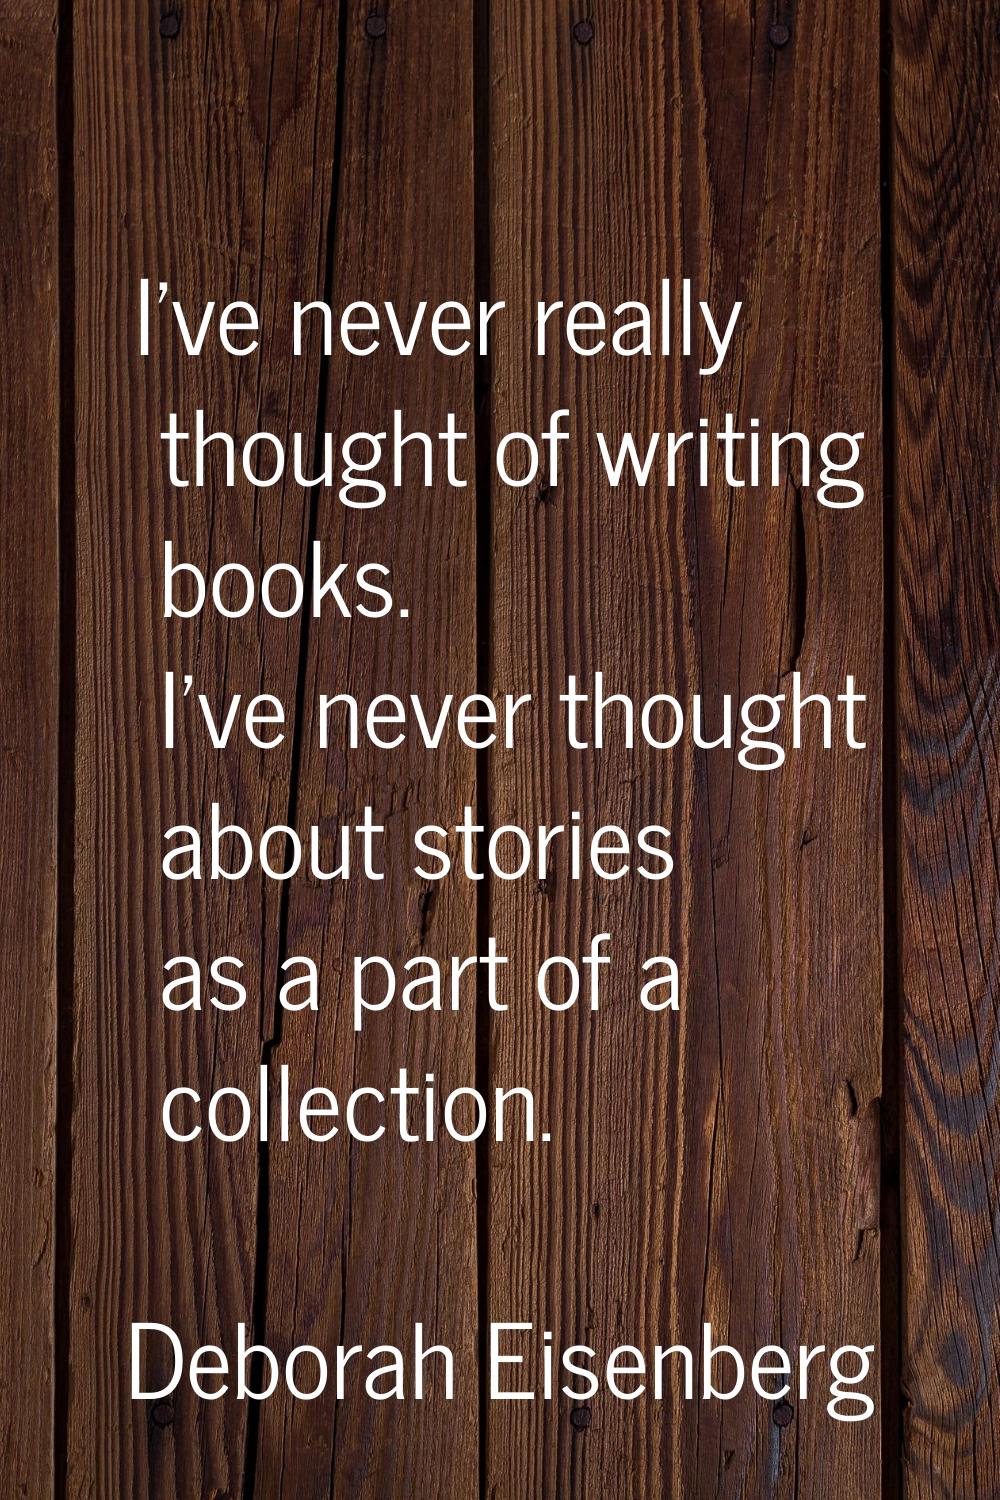 I've never really thought of writing books. I've never thought about stories as a part of a collect